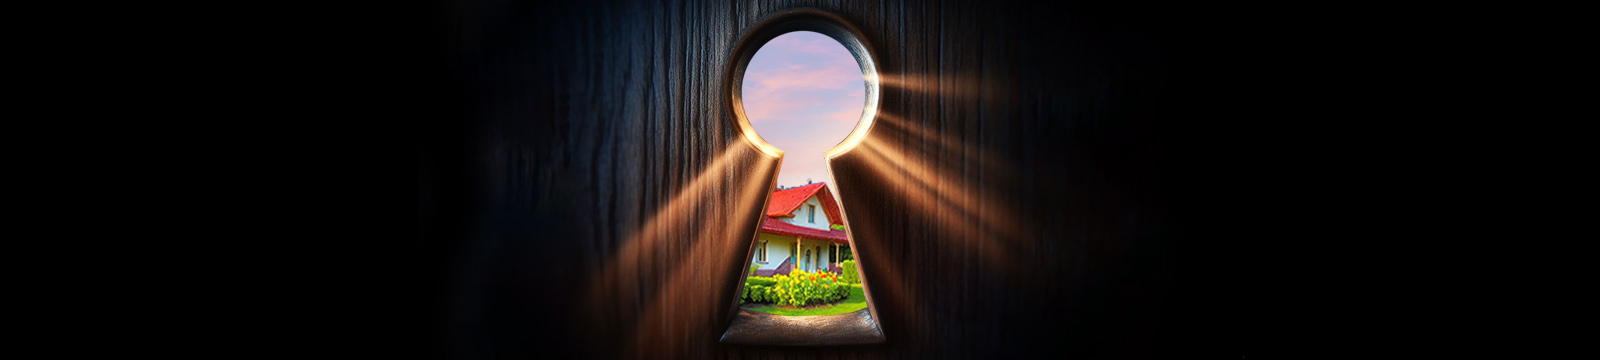 Light shining through the keyhole of a wooden door with a bright house visible through the hole.